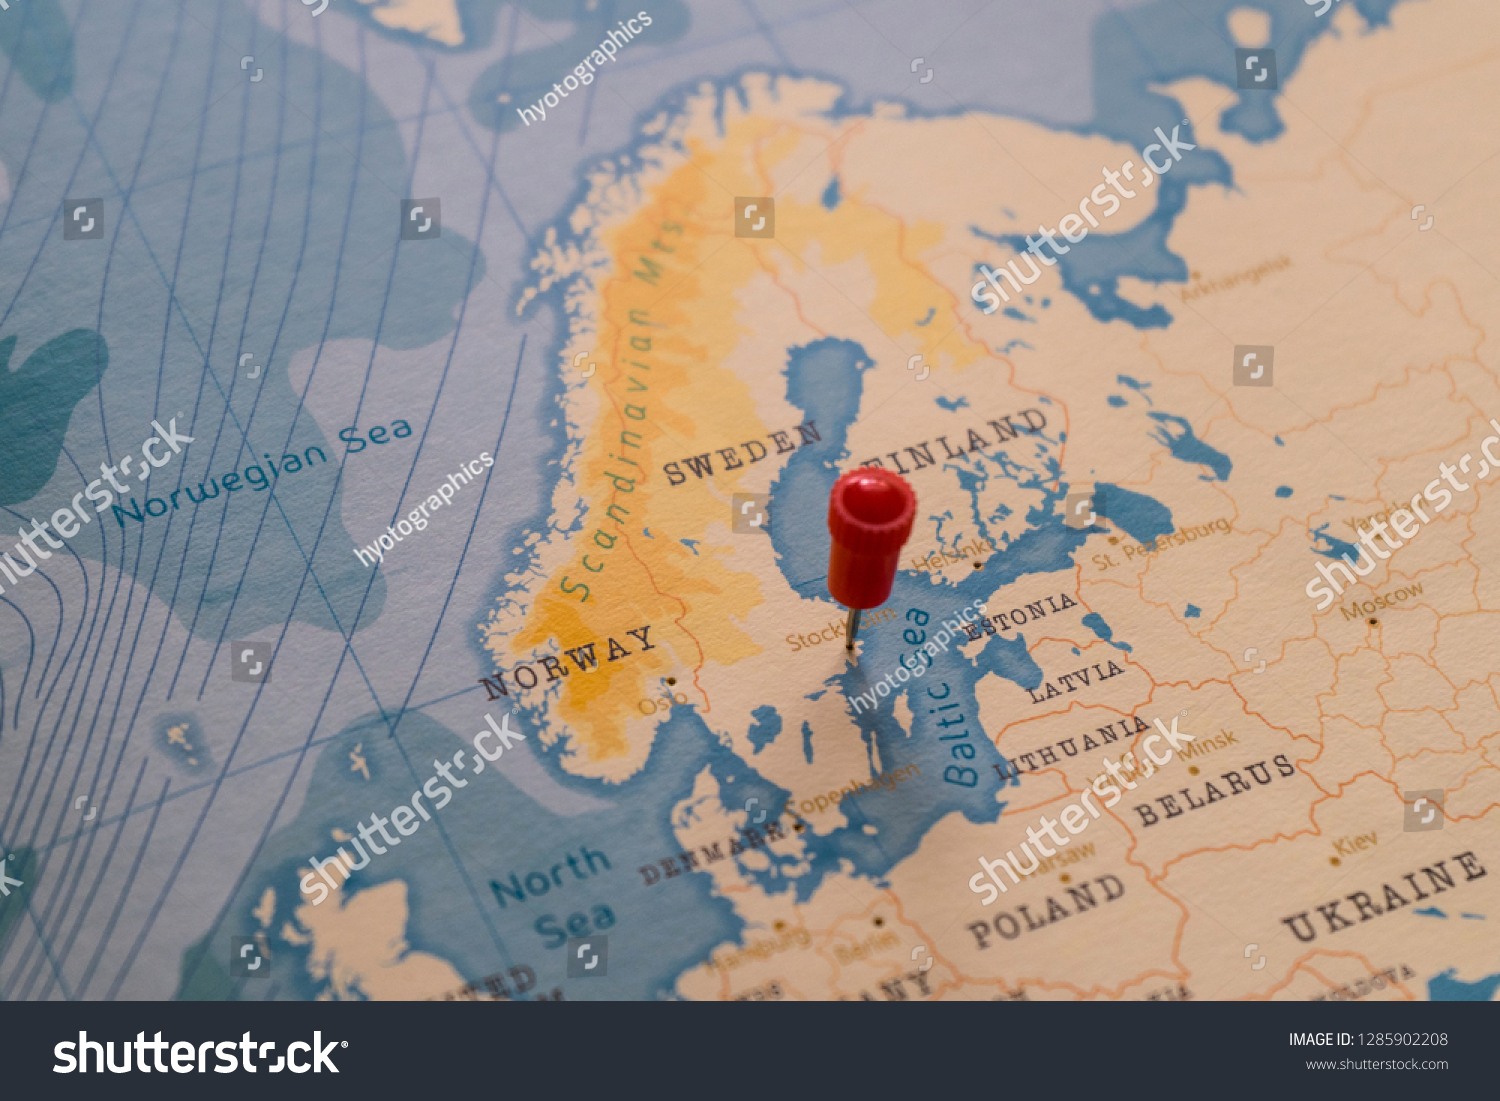 Pin On Stockholm Sweden World Map Stock Photo Edit Now